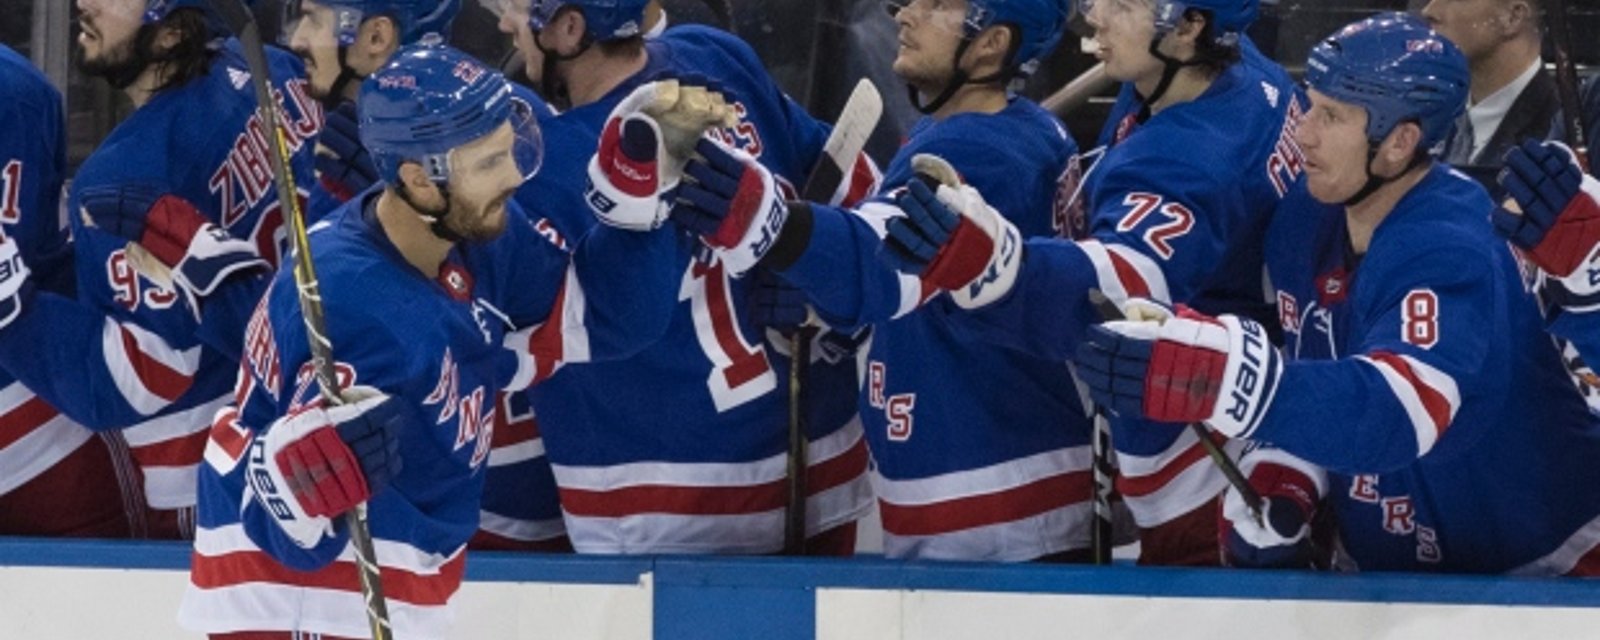 Rangers plan TWO contract buyouts because of “salary-cap hell”